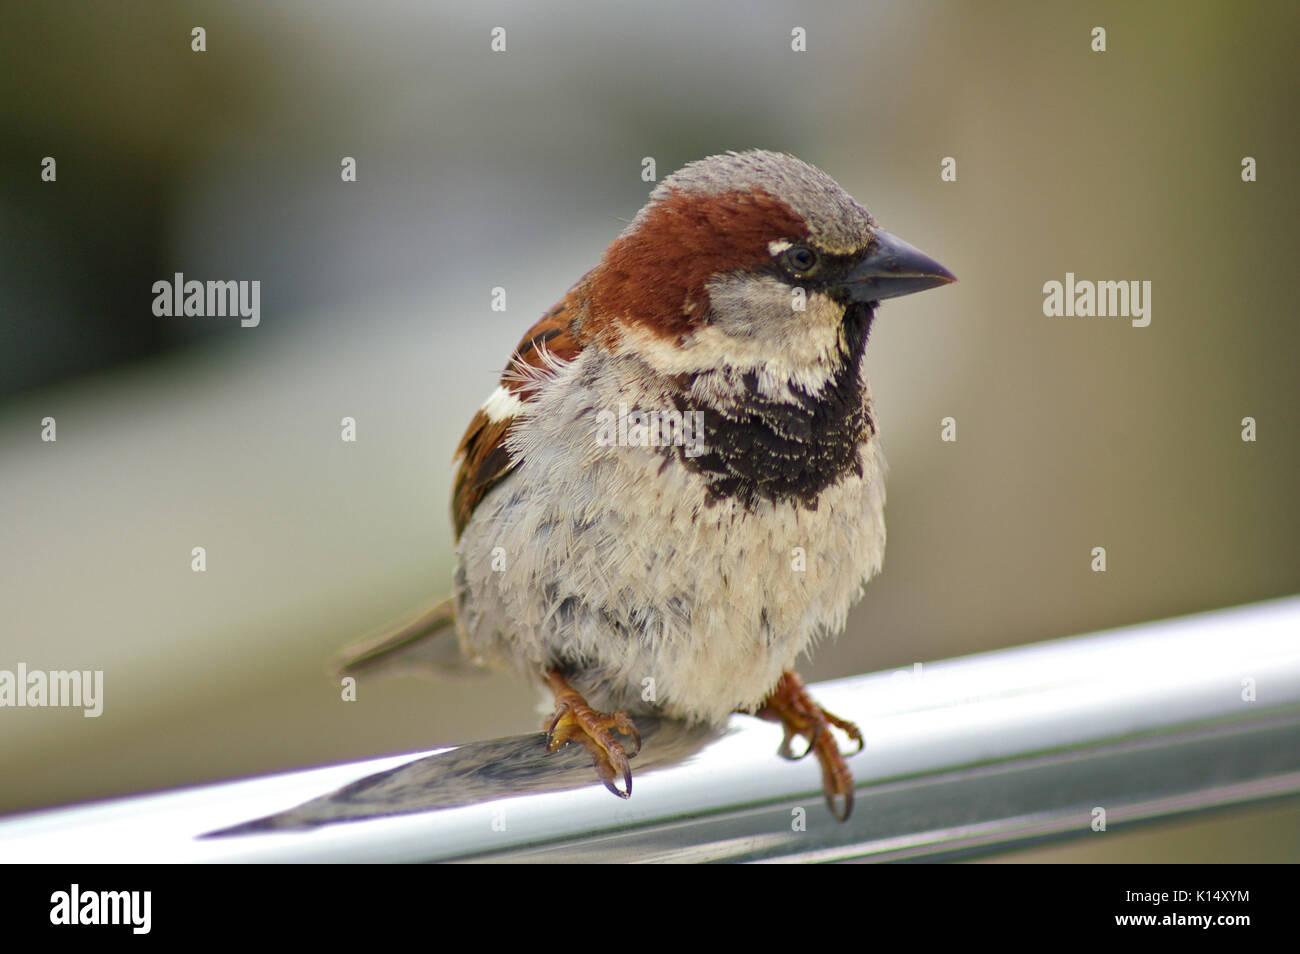 Male sparrow perched on a metal rail Stock Photo